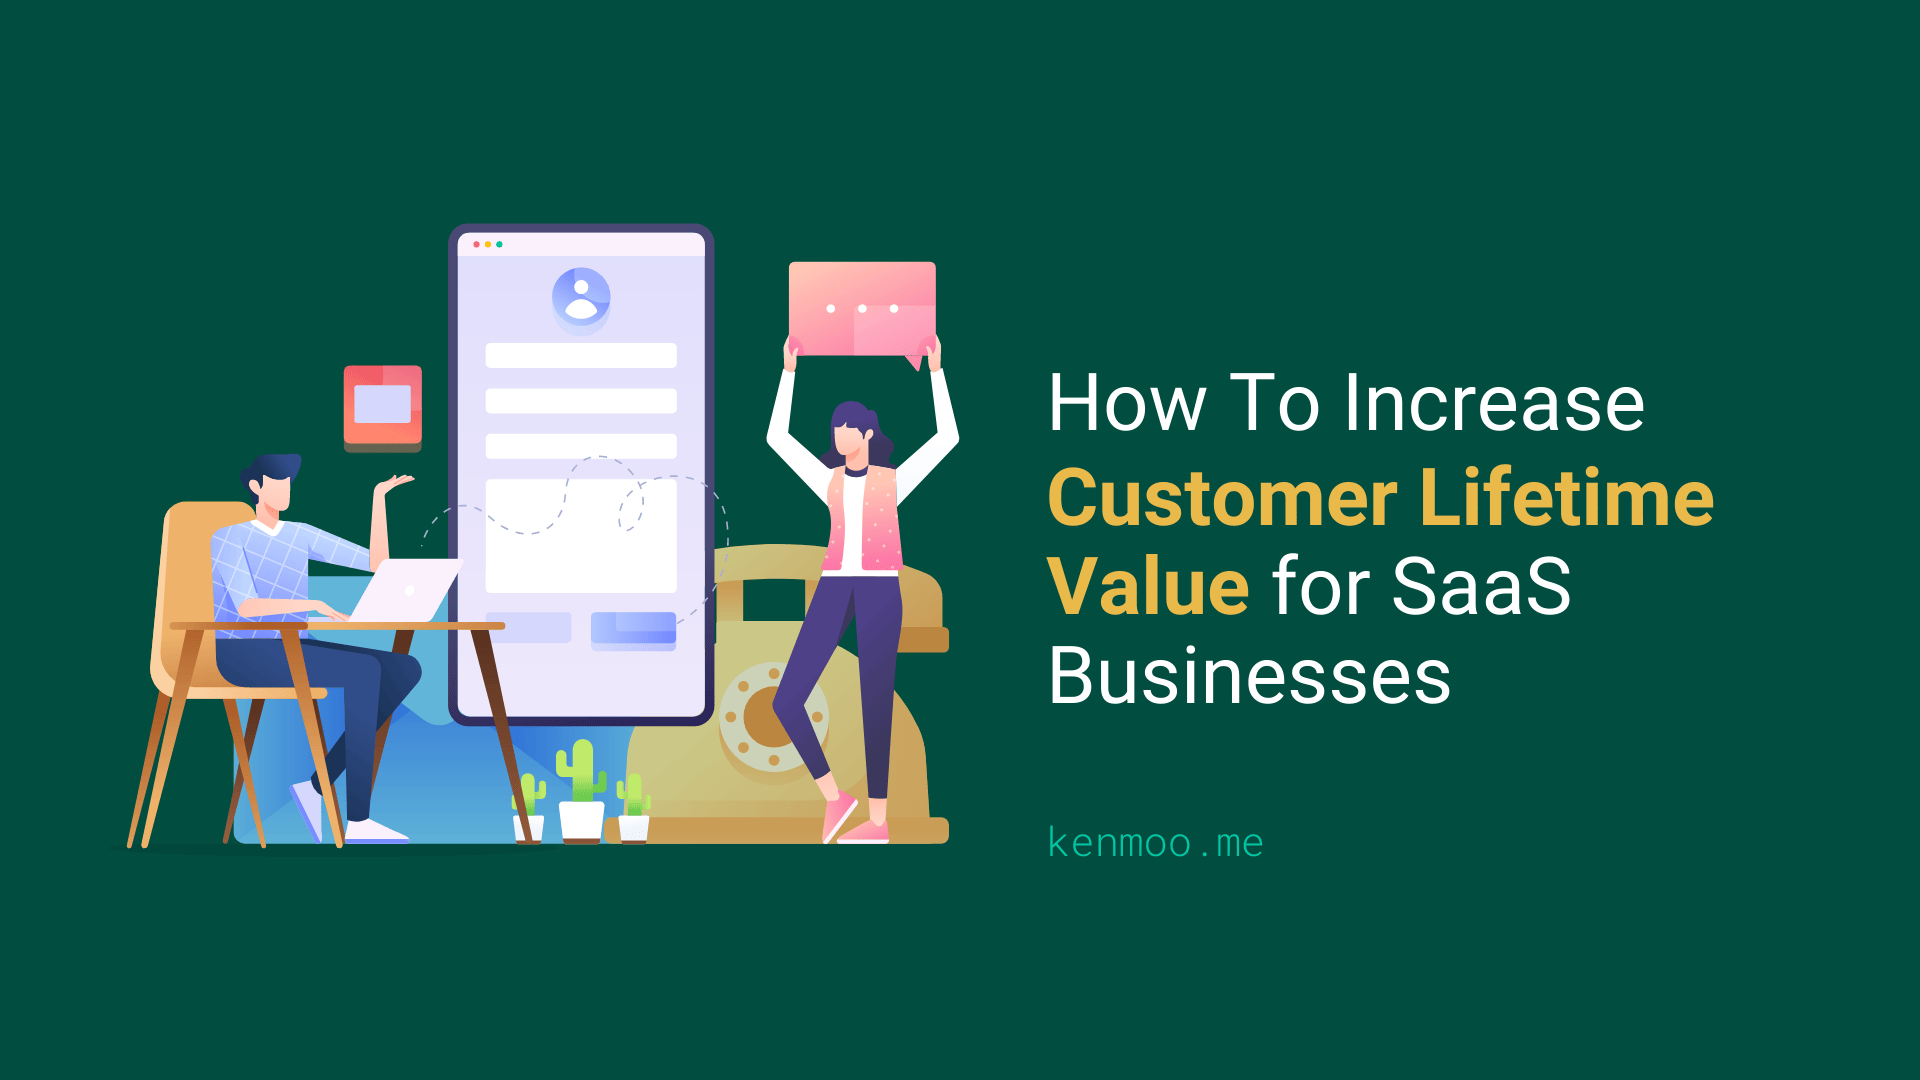 How To Increase Customer Lifetime Value For SaaS Businesses